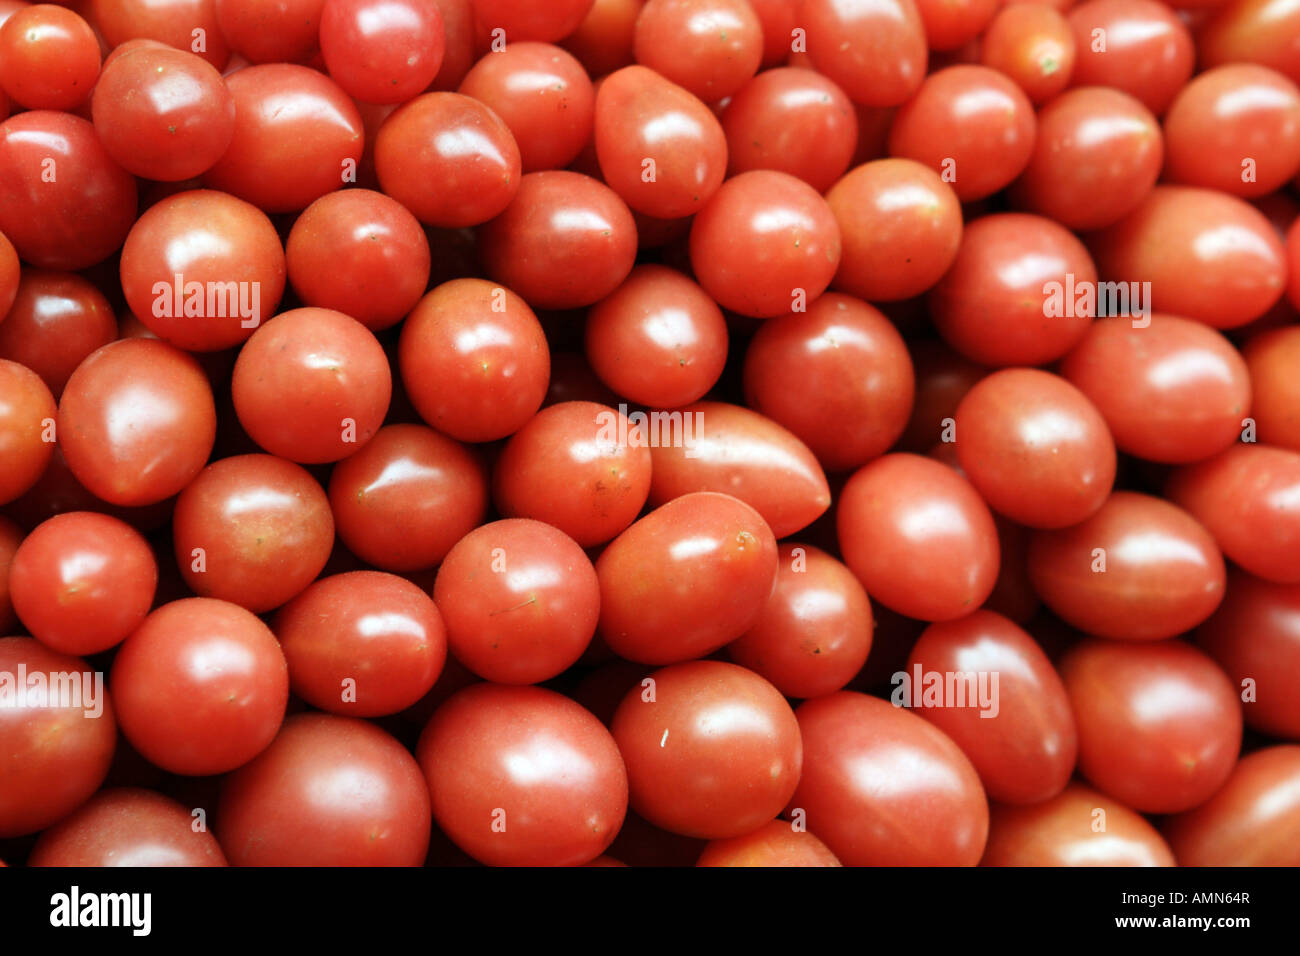 Tomatoes at a market in Tibet, China Stock Photo